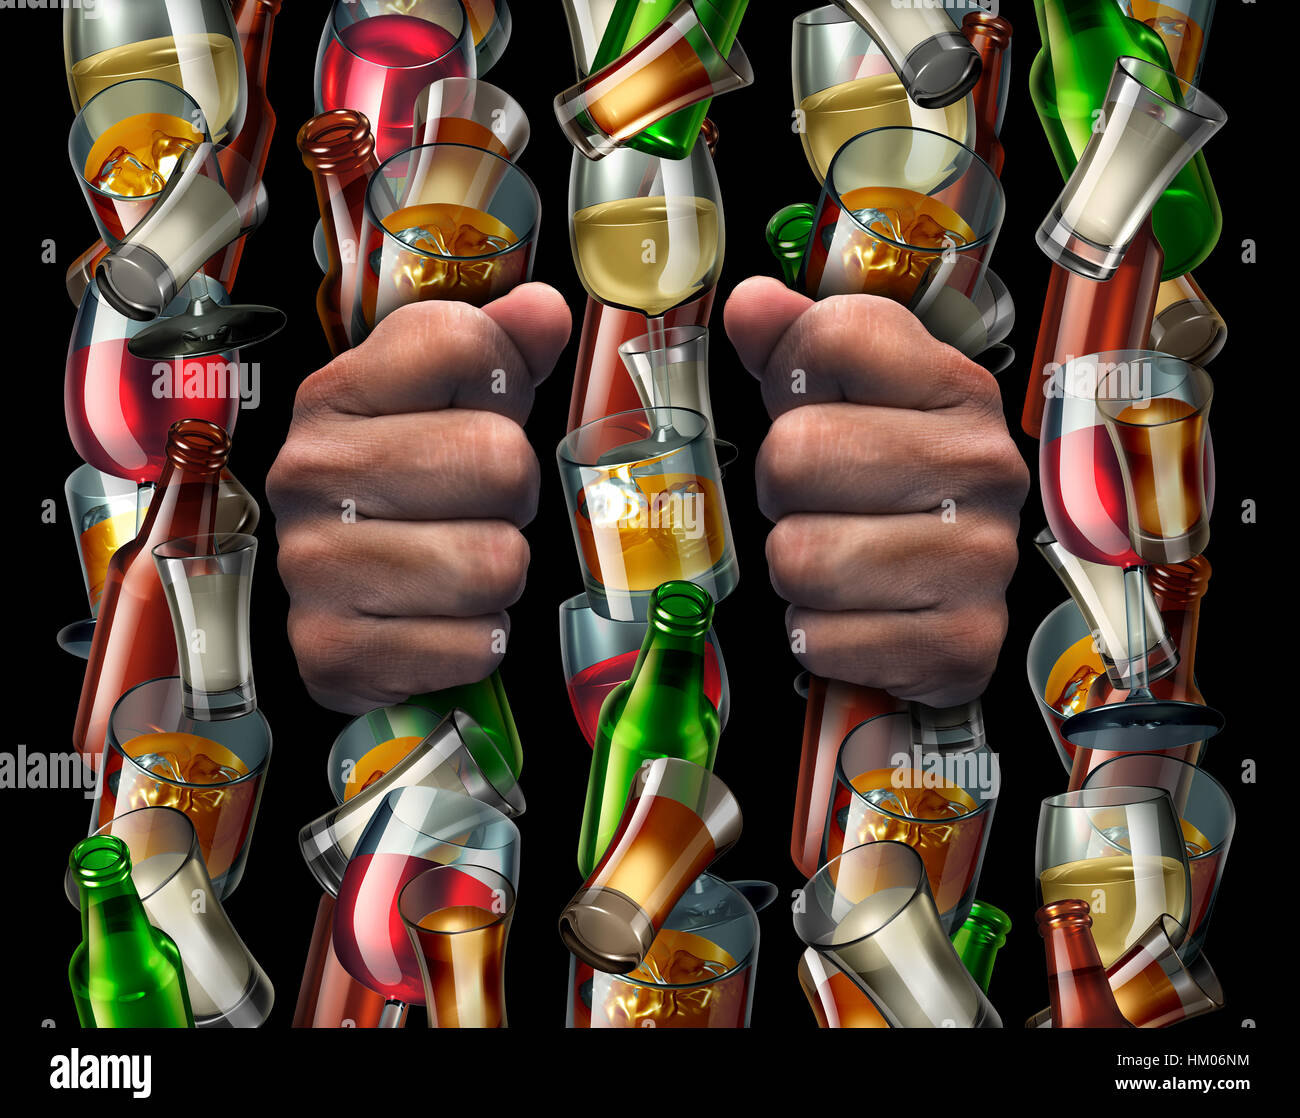 Alcohol addiction and trapped by alcoholism concept as the hands of a drunk prisoner holding a group of liquor bottles and glasses shaped as prison ba Stock Photo